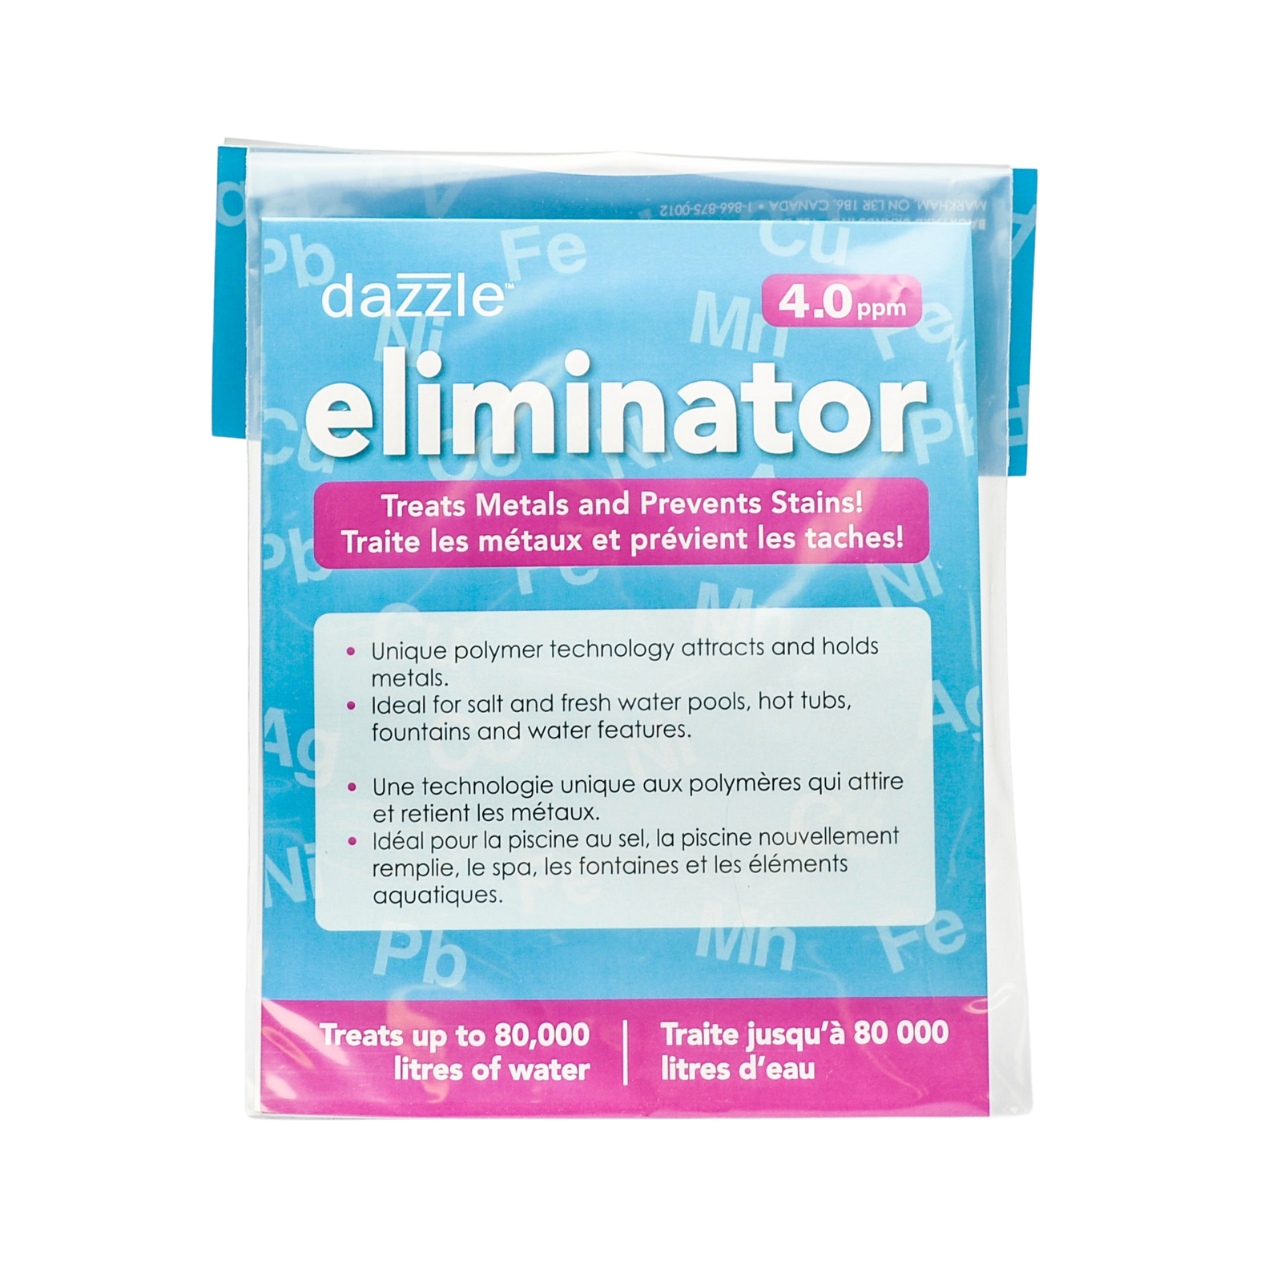 Dazzle™ Eliminator - Treats Metals and Prevents Stains! (4.0 ppm)